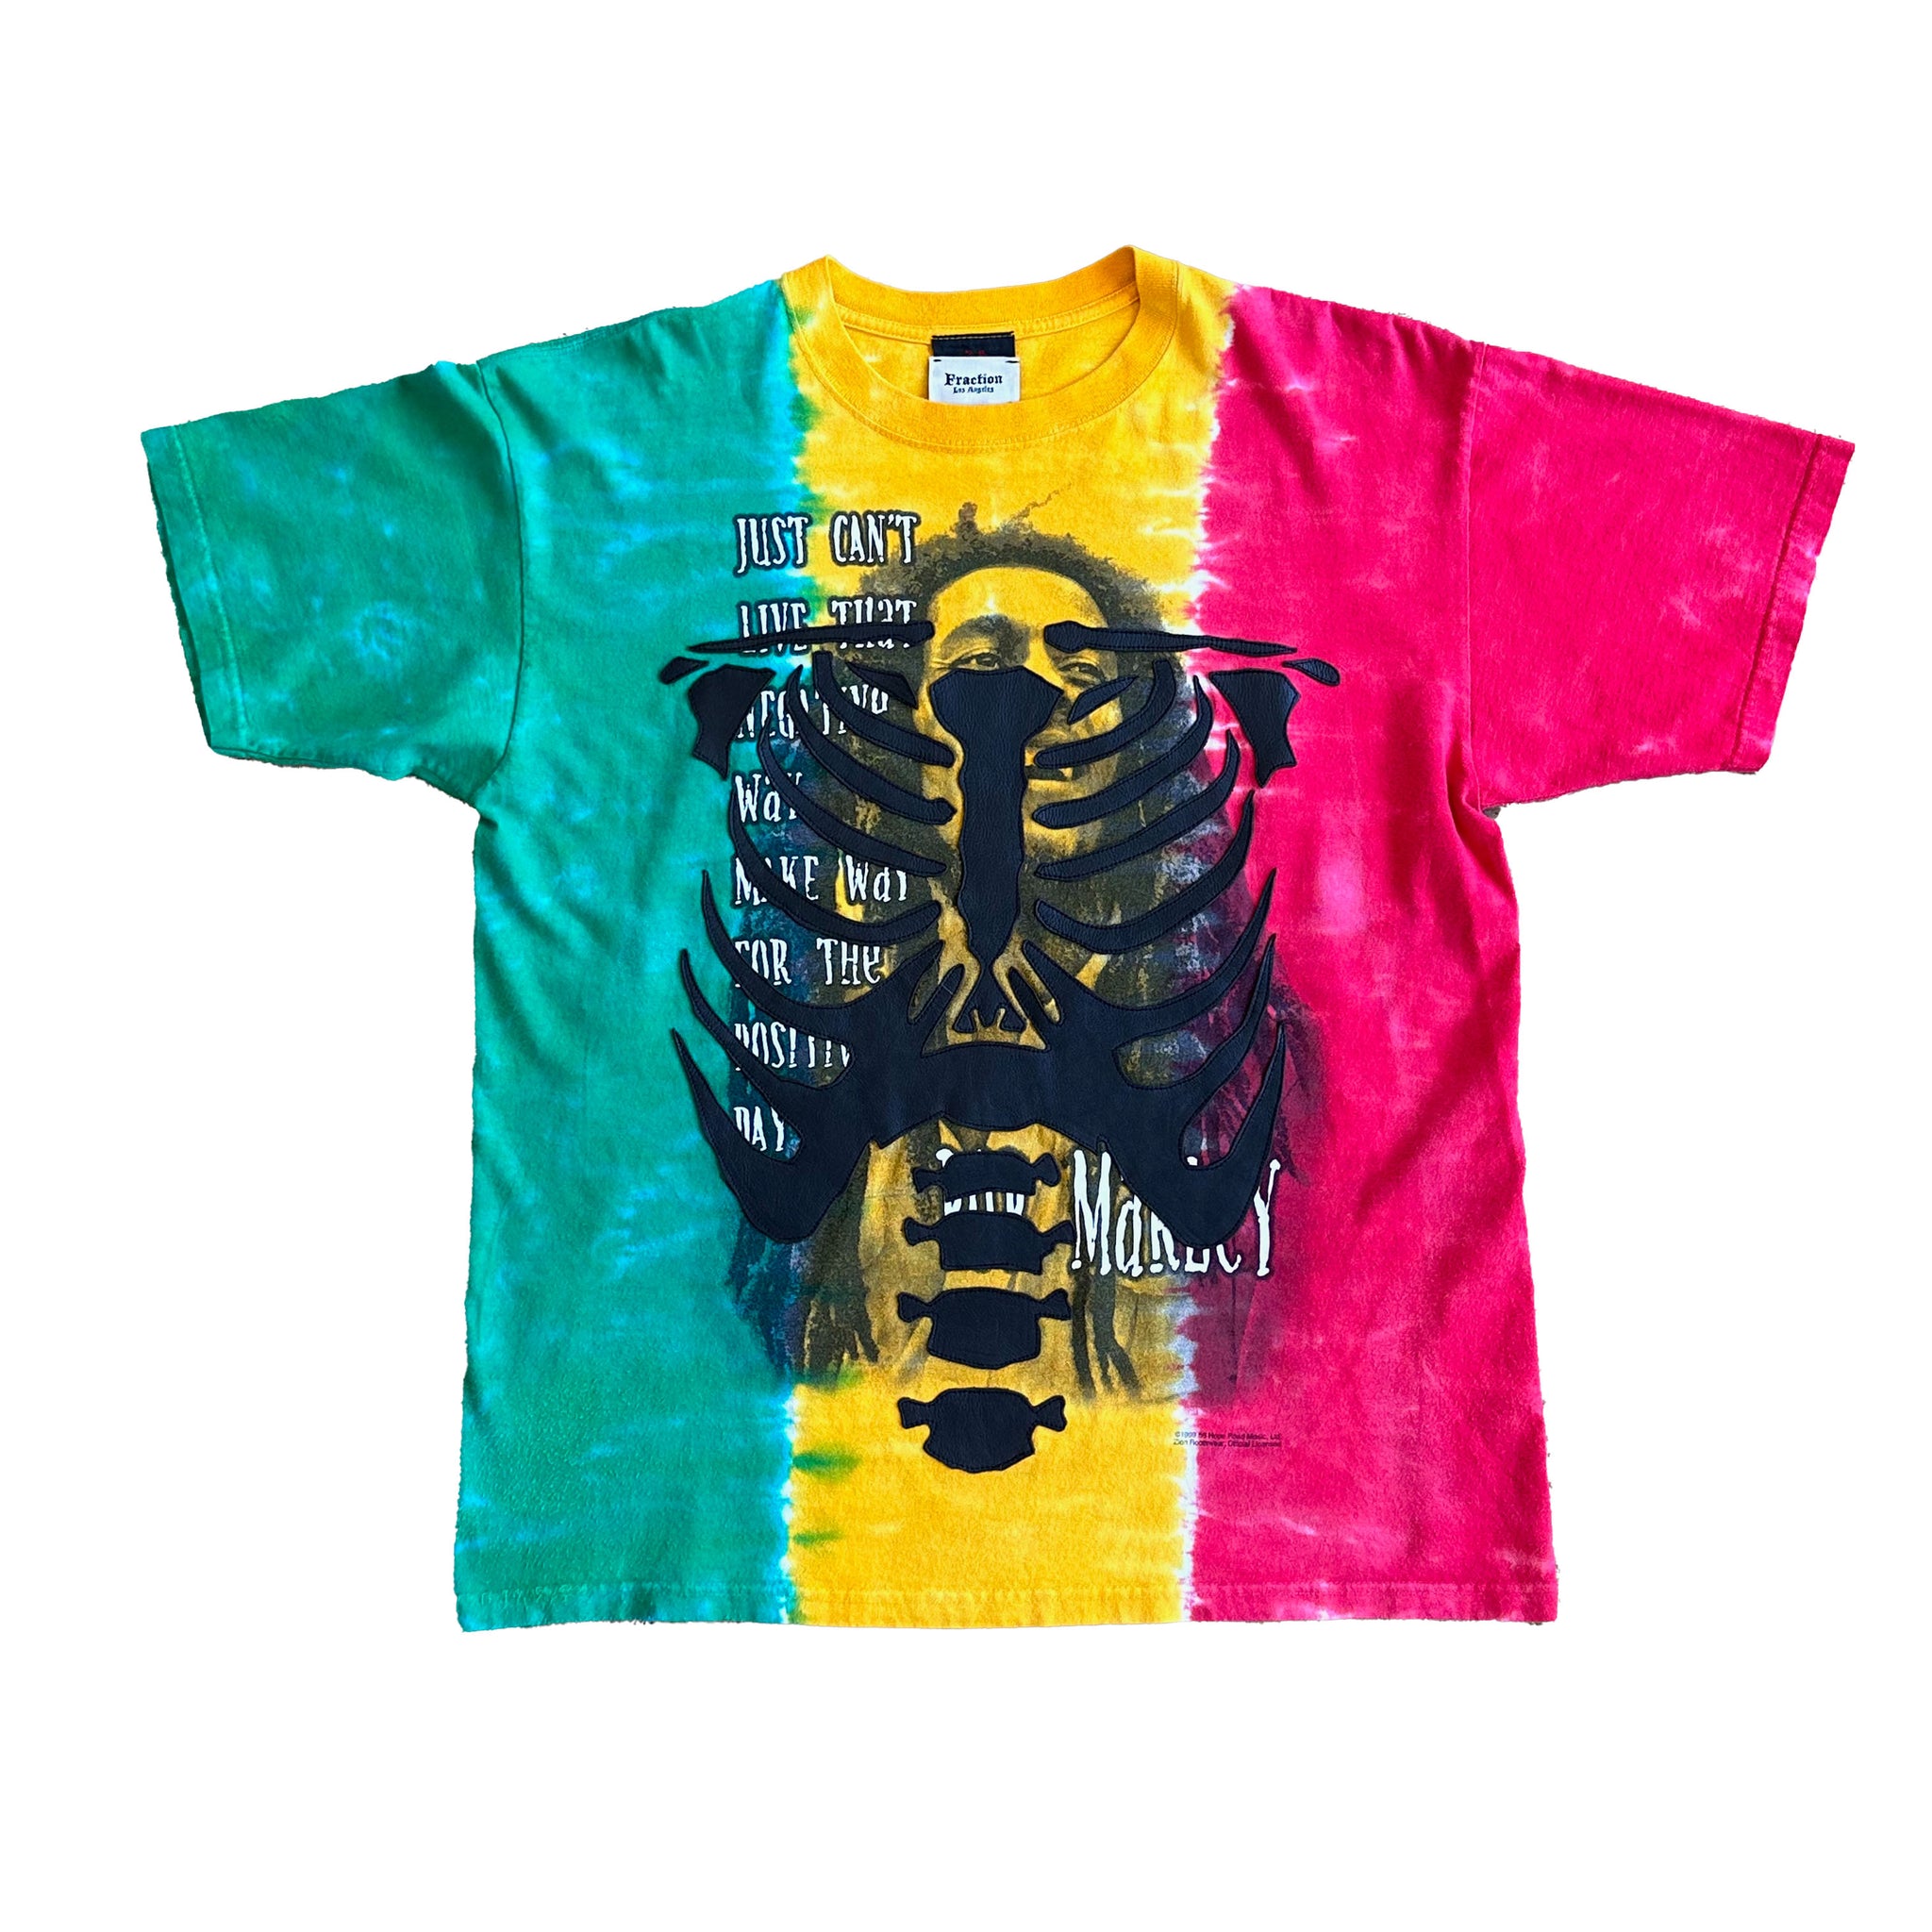 1999 Bob Marley Vintage T-shirt with Leather Ribcage Appliqué